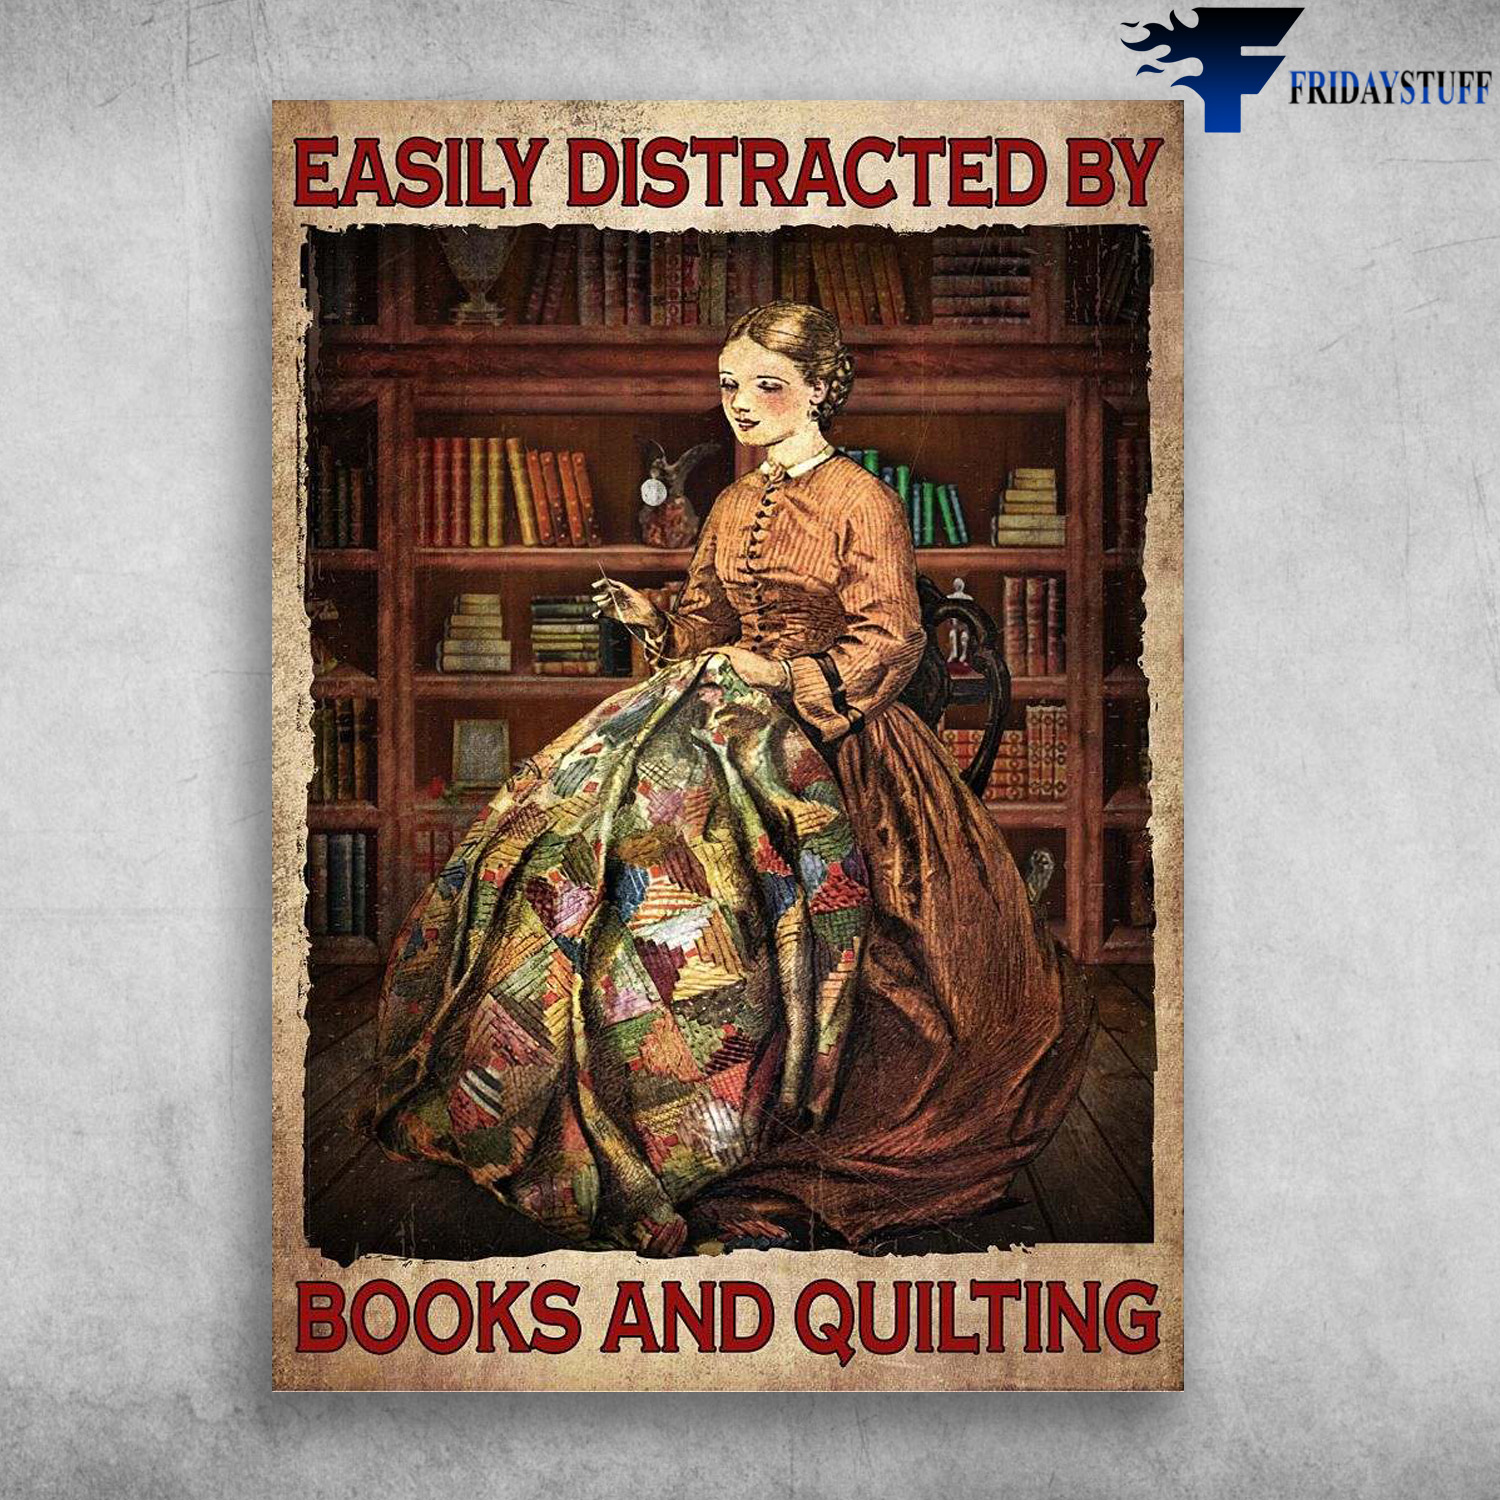 Girl Quilting, Book Lover - Easily Distracted By, Books And Quilting